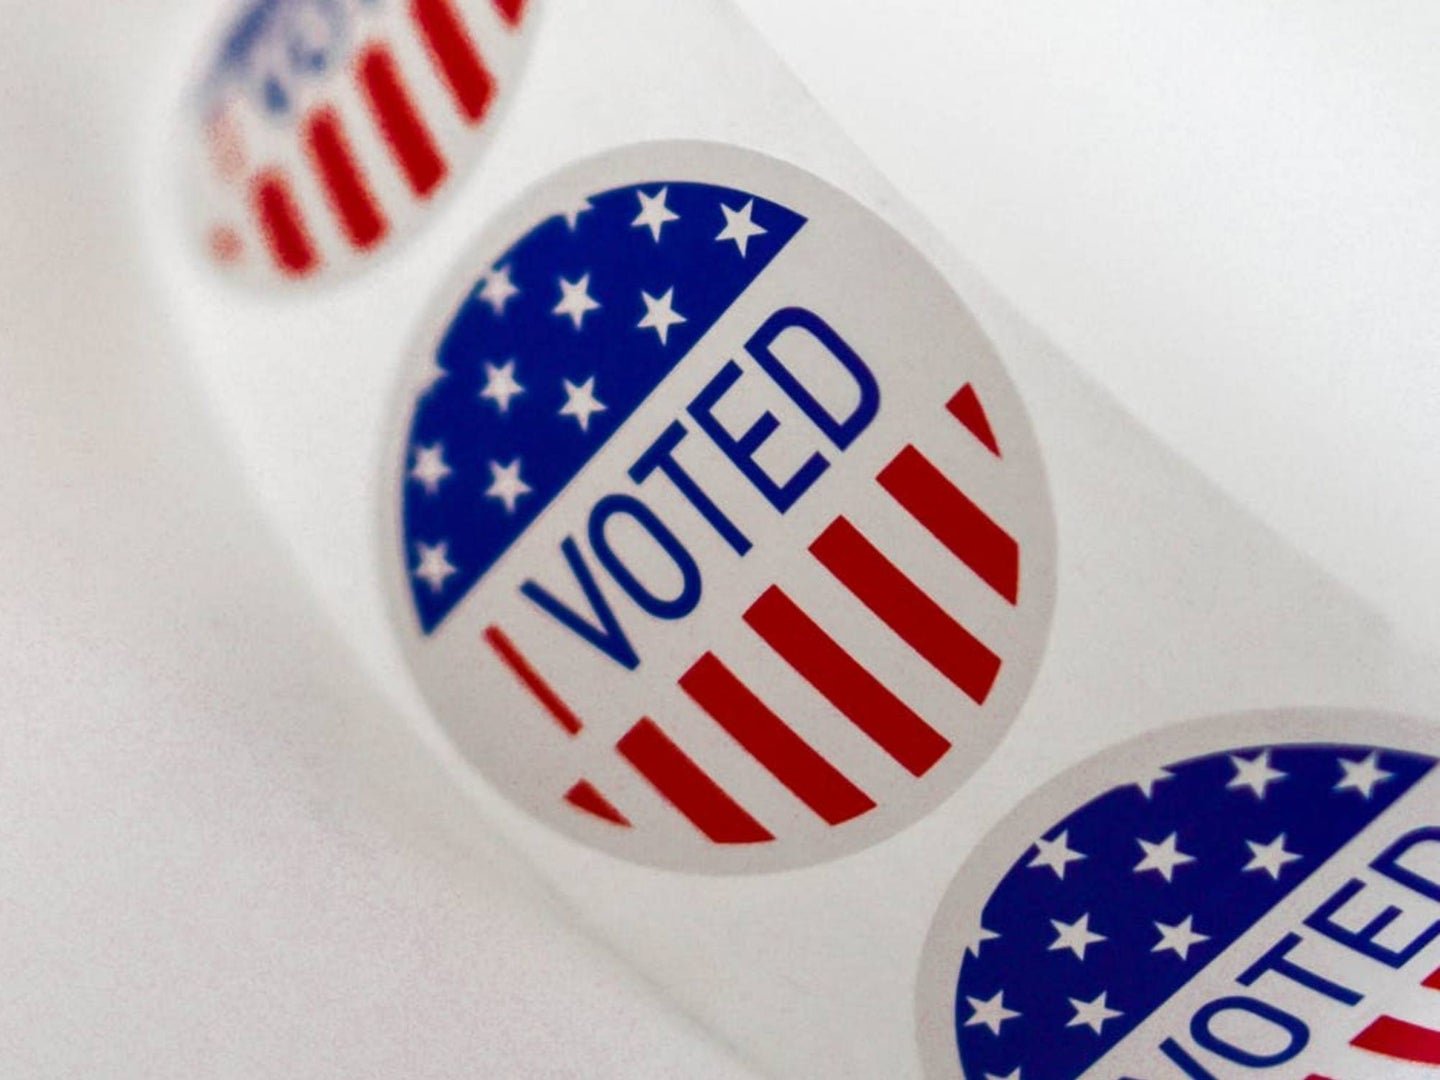 COVID has created a shortage of poll workers. Here’s how to step in.